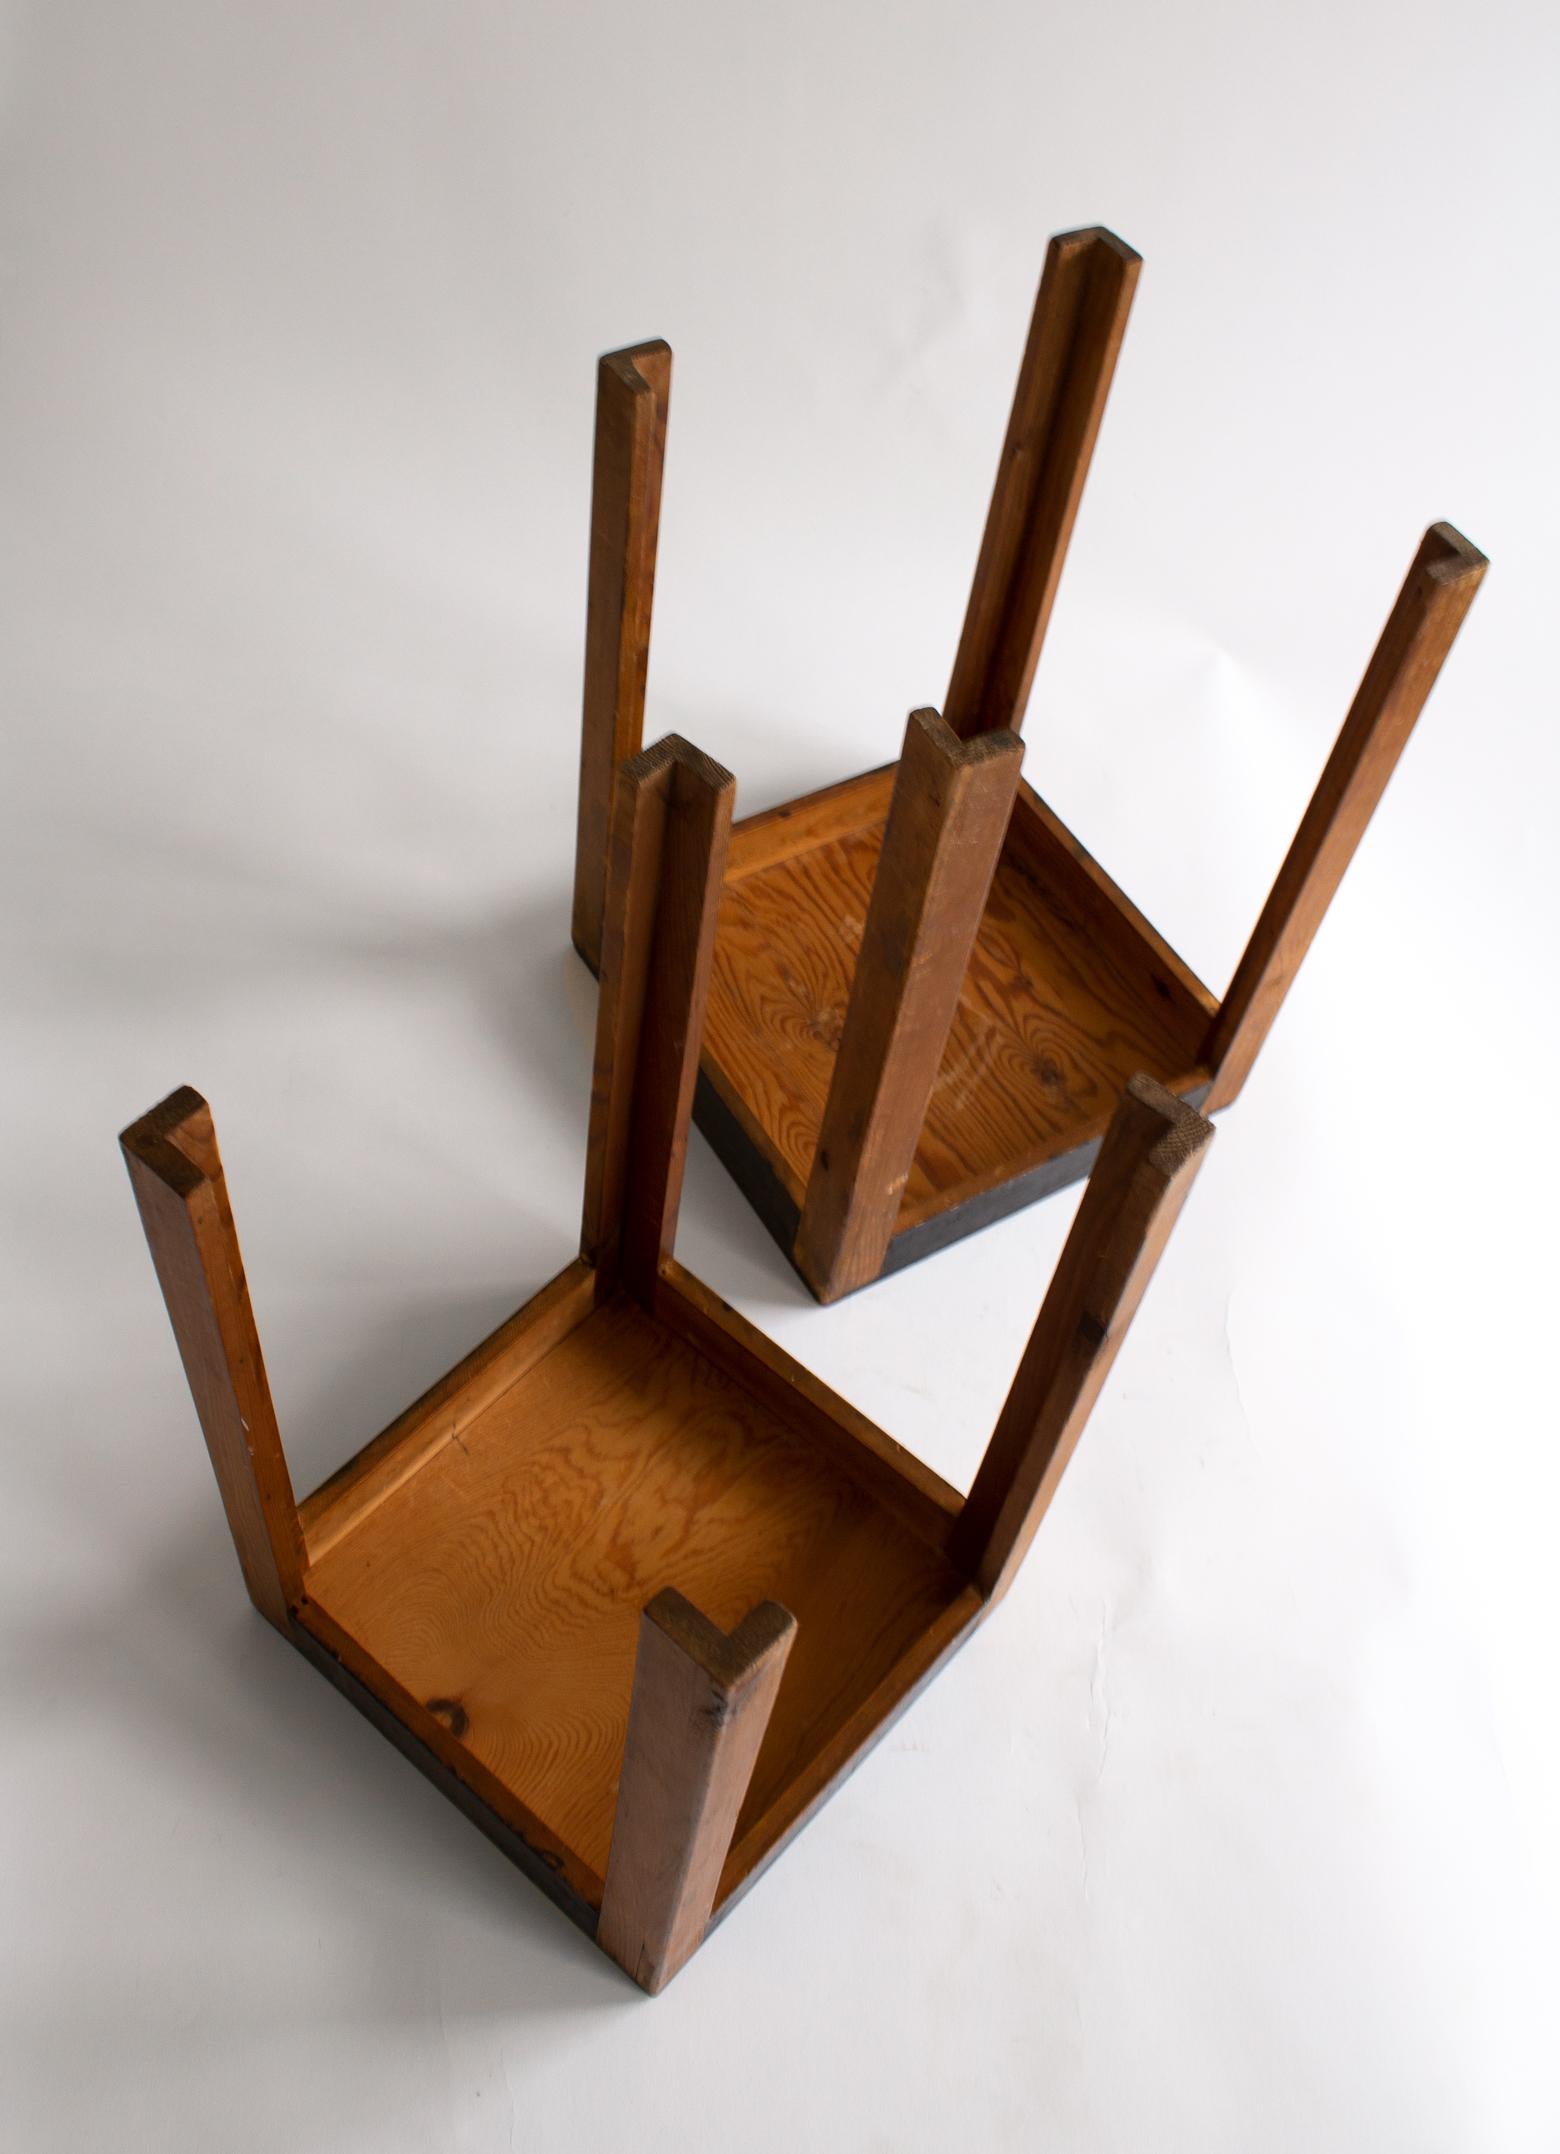 Two Art Deco Nesting Tables Made of Unknown Swedish Artist in 1930s-1940s For Sale 2